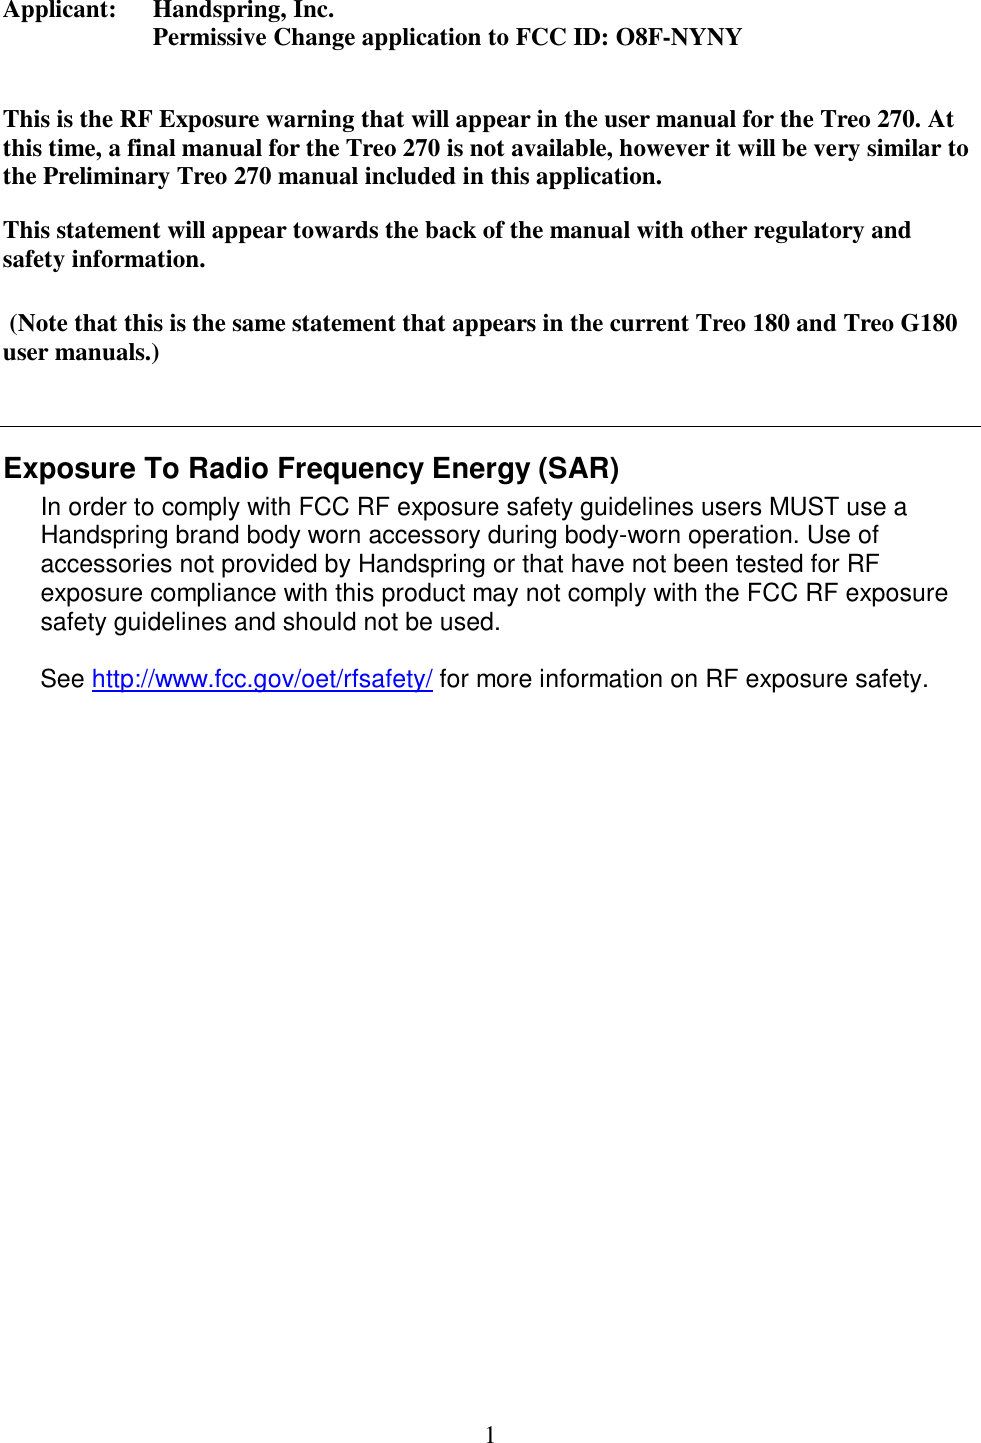 1 Applicant:     Handspring, Inc.   Permissive Change application to FCC ID: O8F-NYNY  This is the RF Exposure warning that will appear in the user manual for the Treo 270. At this time, a final manual for the Treo 270 is not available, however it will be very similar to the Preliminary Treo 270 manual included in this application. This statement will appear towards the back of the manual with other regulatory and safety information.   (Note that this is the same statement that appears in the current Treo 180 and Treo G180 user manuals.)     Exposure To Radio Frequency Energy (SAR) In order to comply with FCC RF exposure safety guidelines users MUST use a Handspring brand body worn accessory during body-worn operation. Use of accessories not provided by Handspring or that have not been tested for RF exposure compliance with this product may not comply with the FCC RF exposure safety guidelines and should not be used.  See http://www.fcc.gov/oet/rfsafety/ for more information on RF exposure safety.    